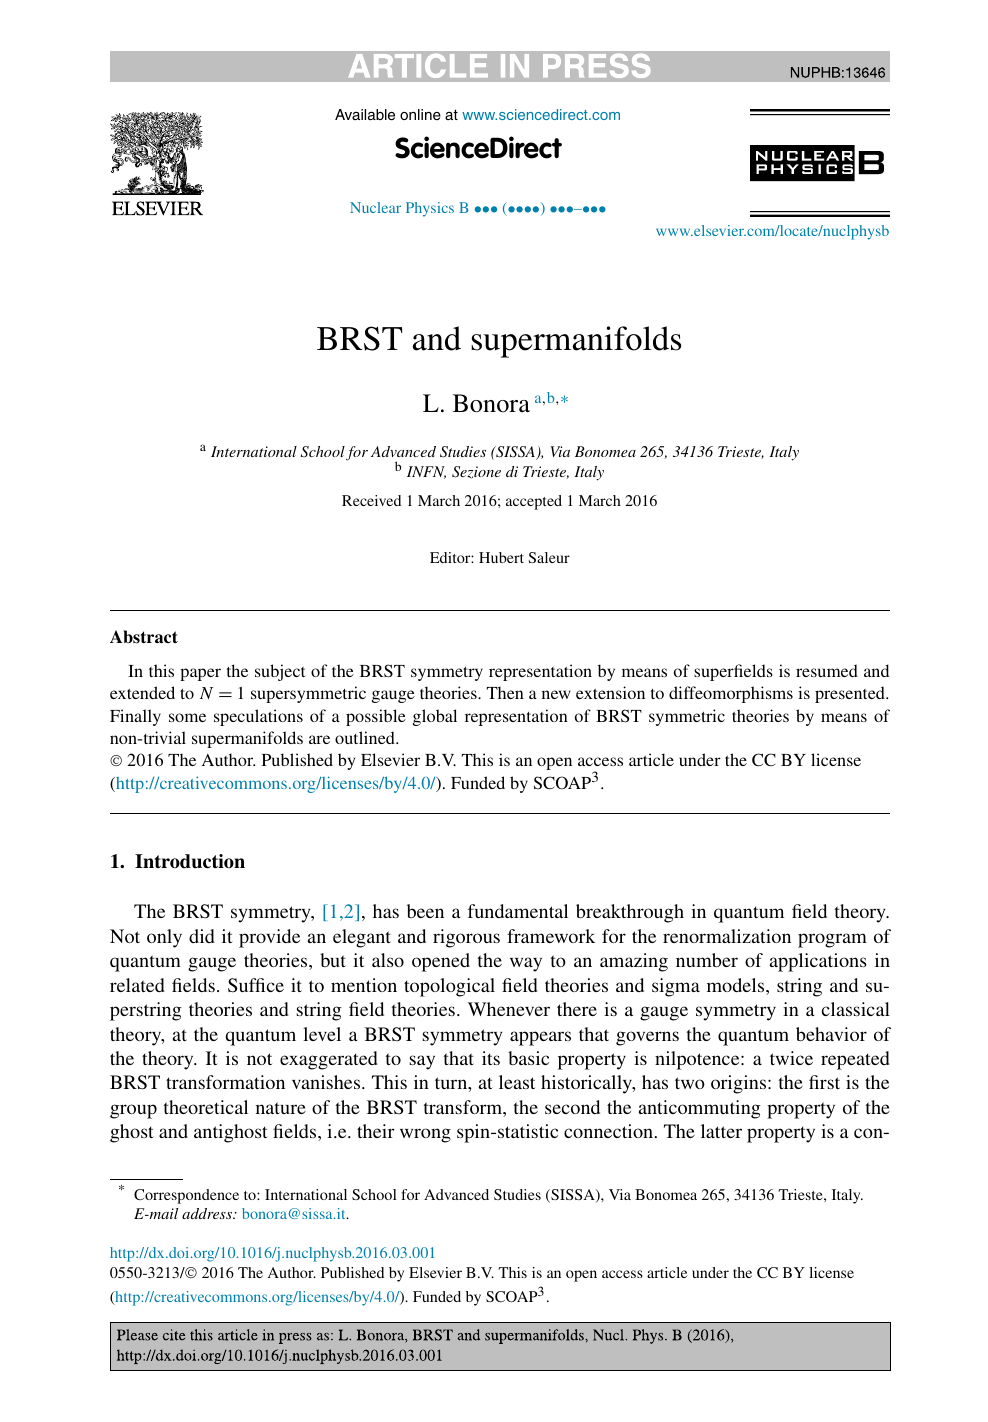 Brst And Supermanifolds Topic Of Research Paper In Physical Sciences Download Scholarly Article Pdf And Read For Free On Cyberleninka Open Science Hub